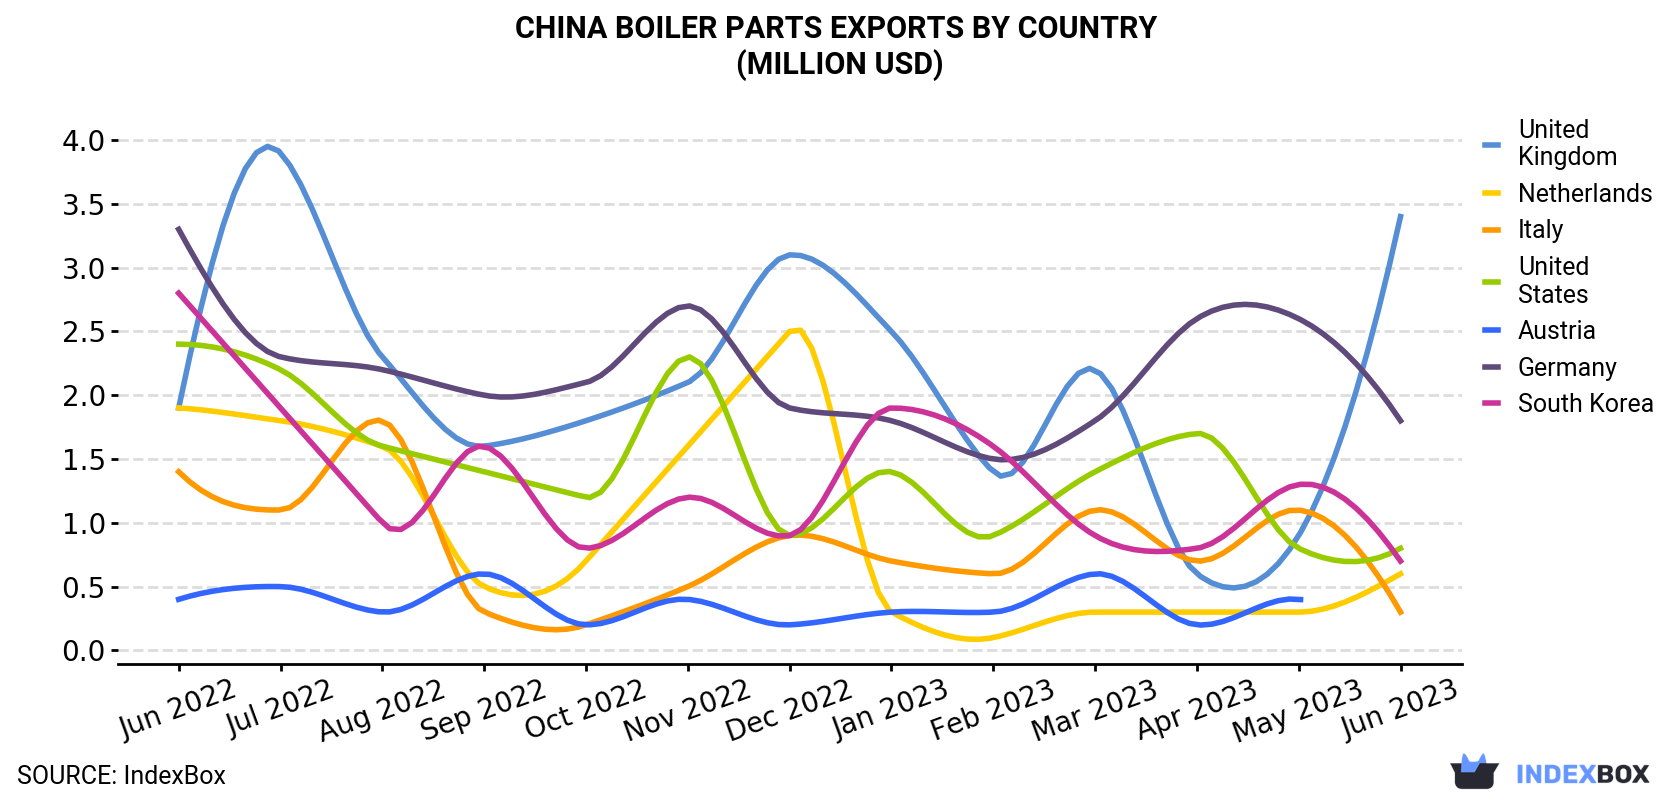 China Boiler Parts Exports By Country (Million USD)